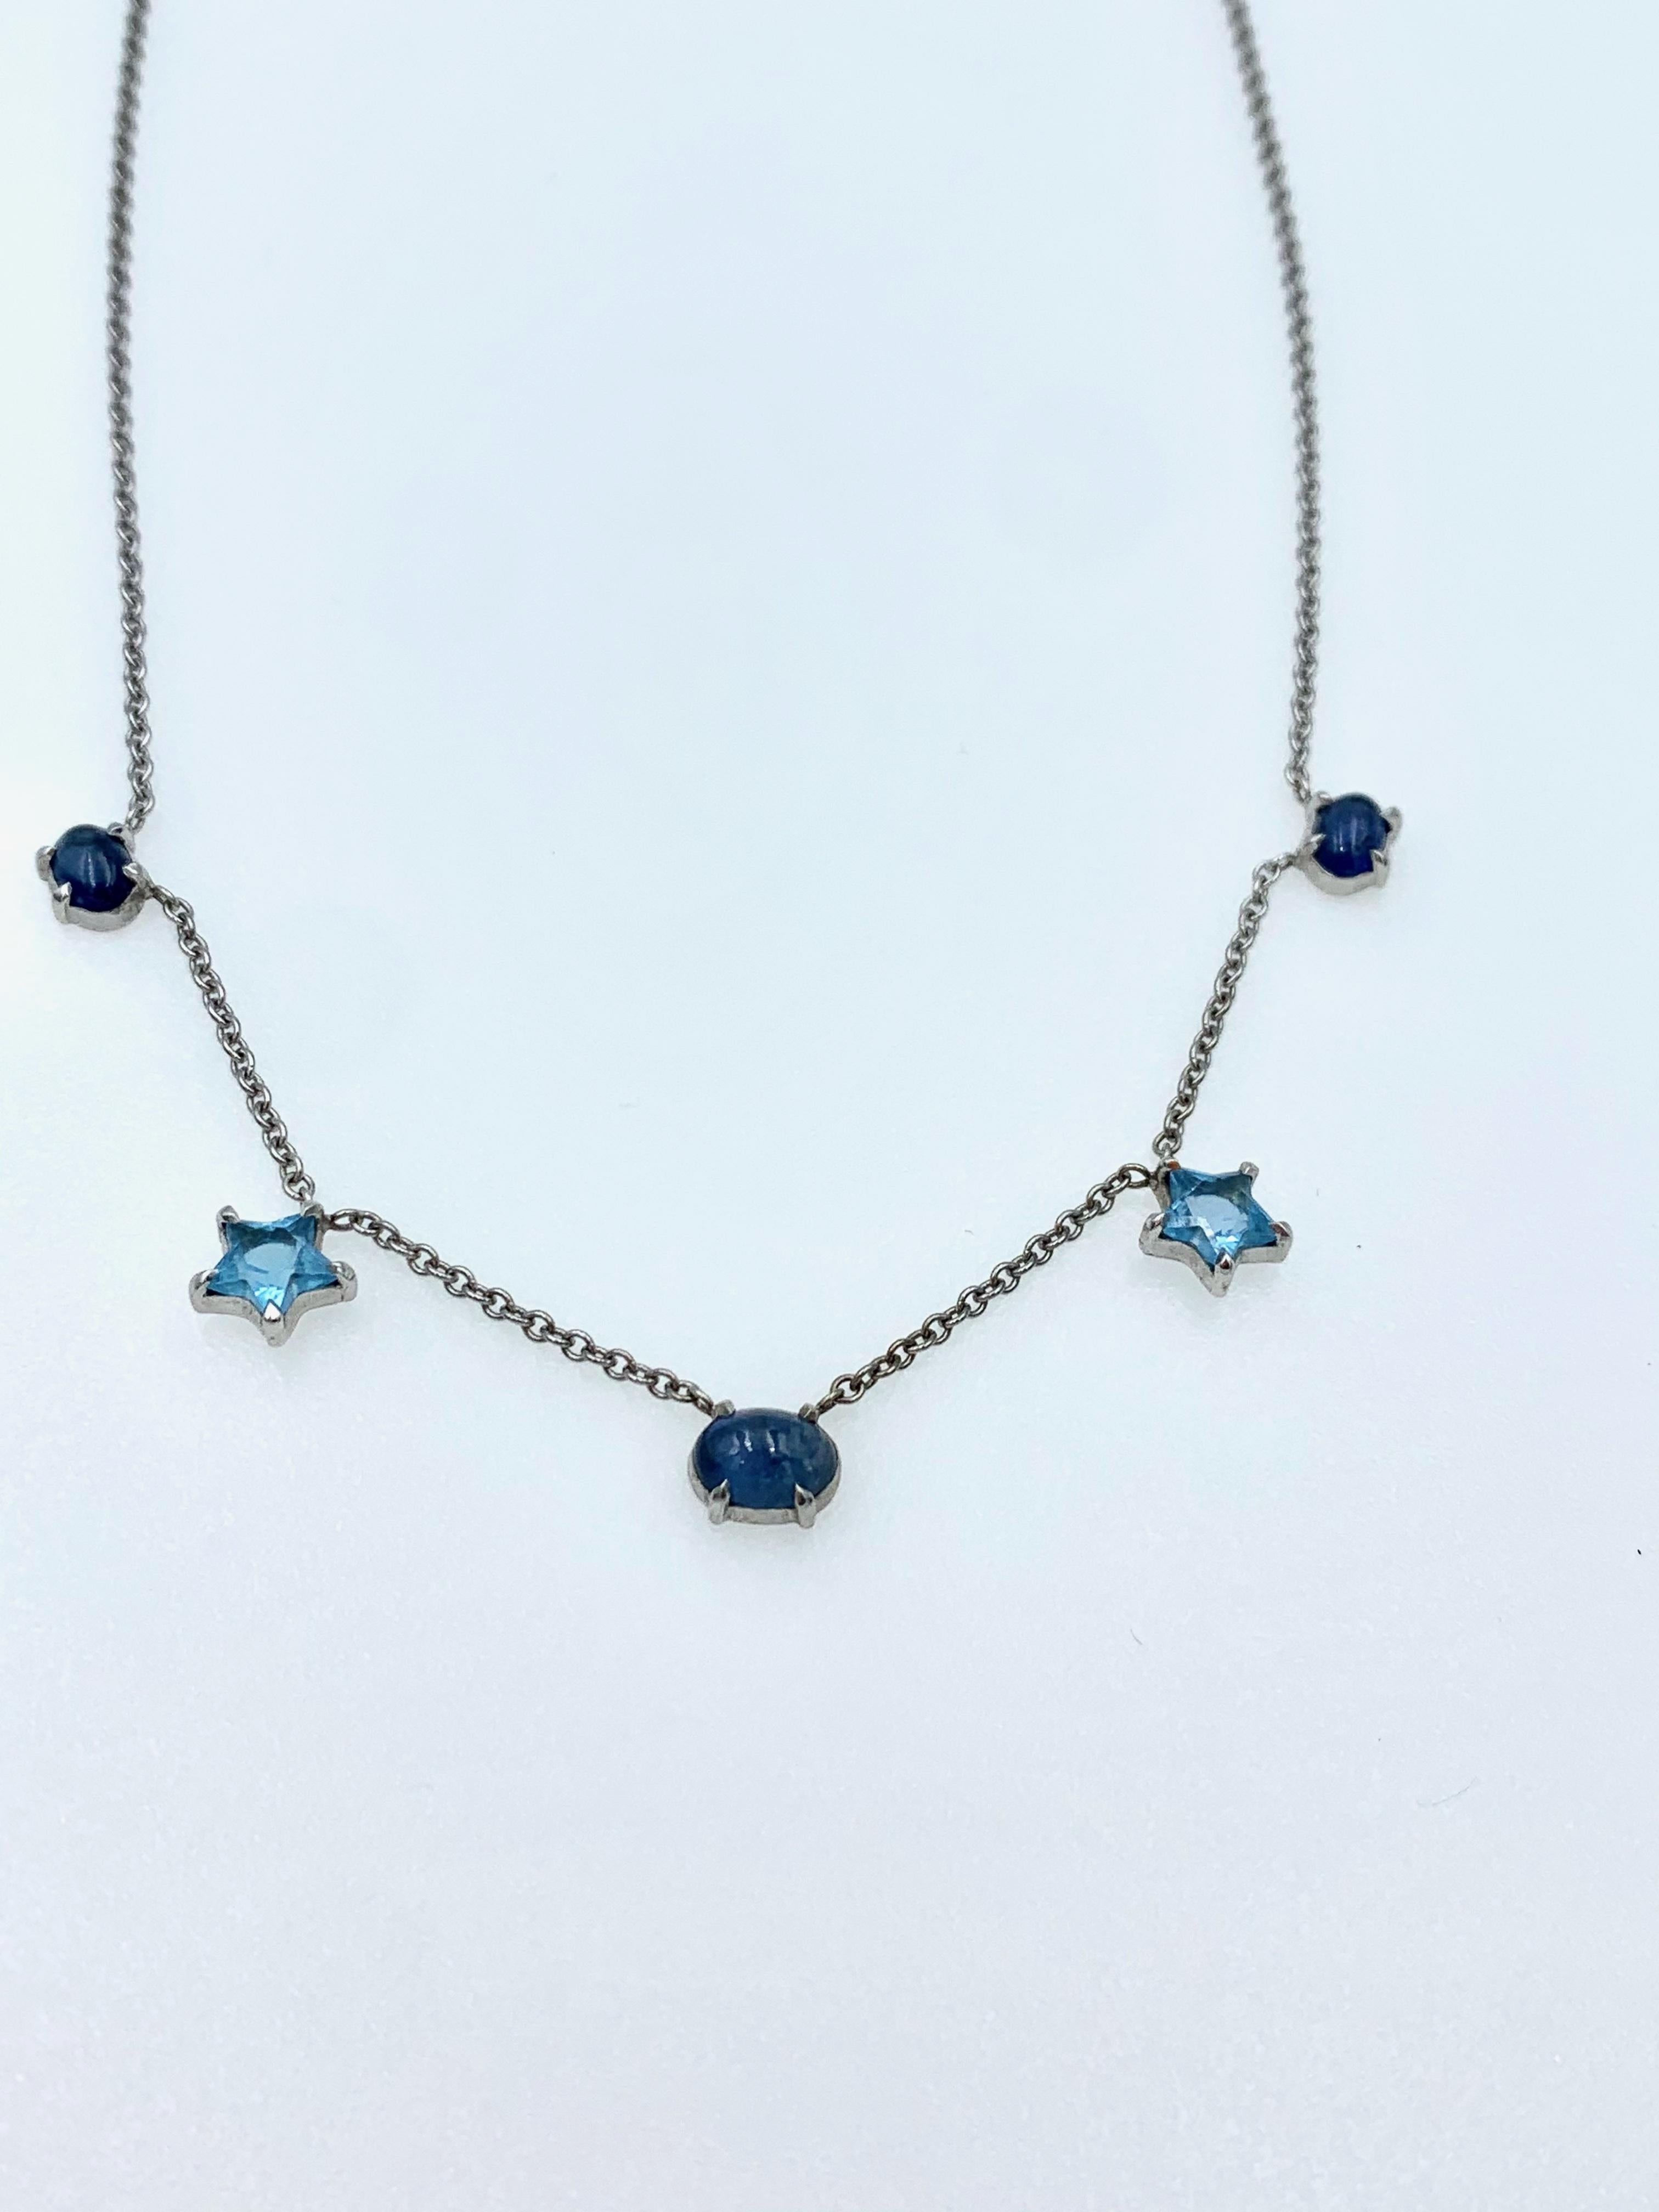 Hand made in 9 karat White gold with three oval blue Sapphire cabochons and two sky blue Topaz stars distributed throughout the necklines at a length of either 16